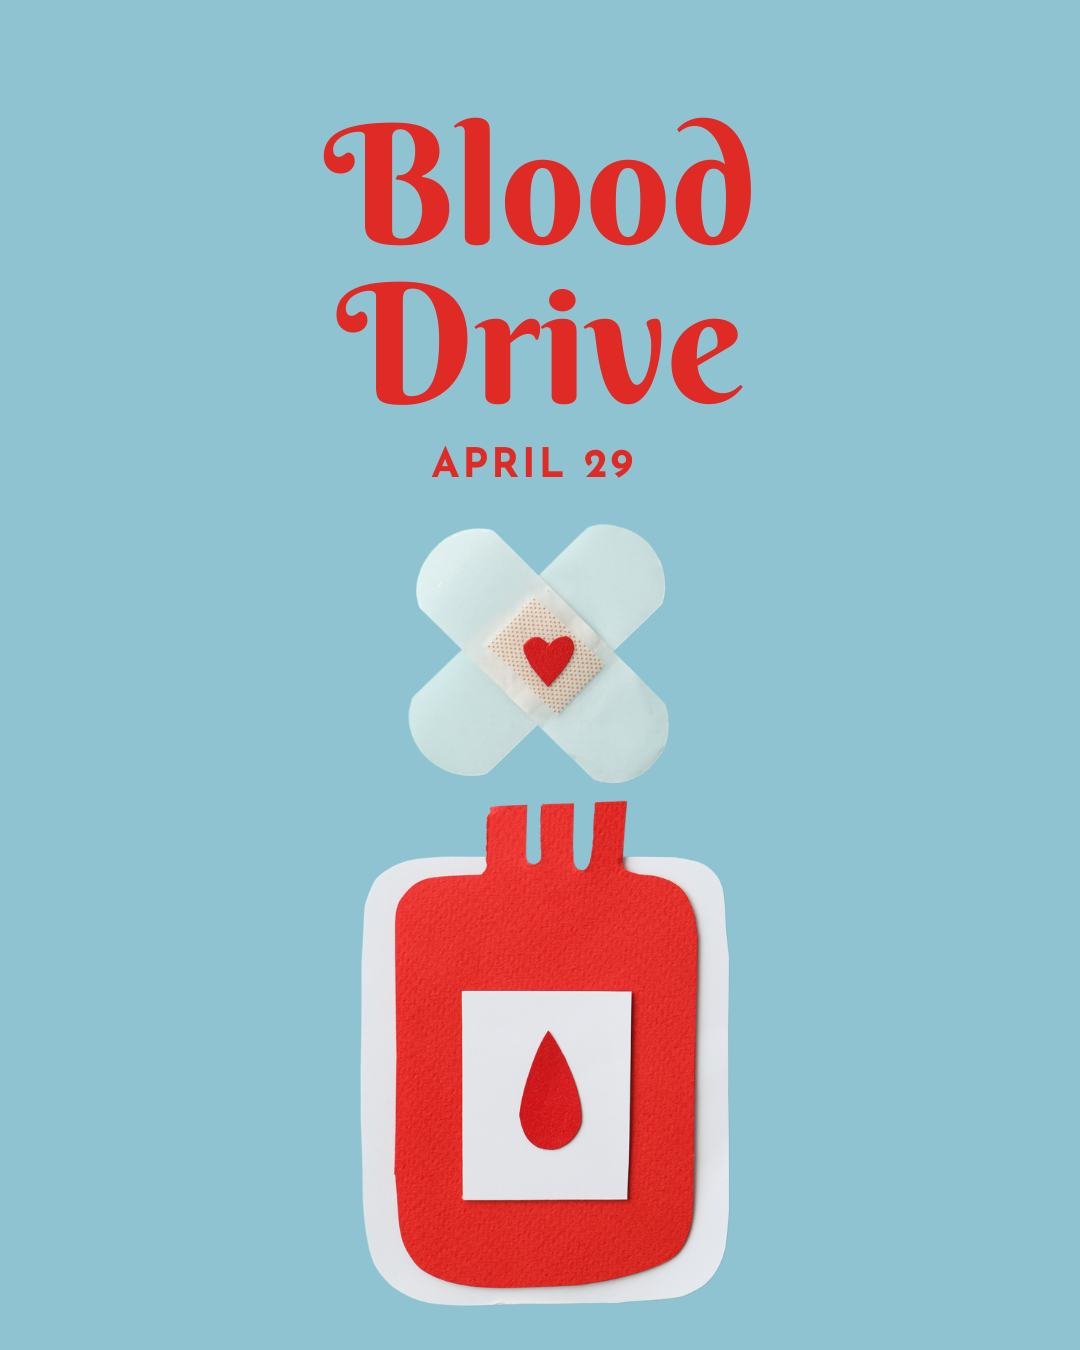 We have a blood drive coming up on April 29th and we need your help. Donating blood is one of the most important things we can do for another person. By donating blood you are easing someone's pain or saving a life. Please follow the link in our bio 